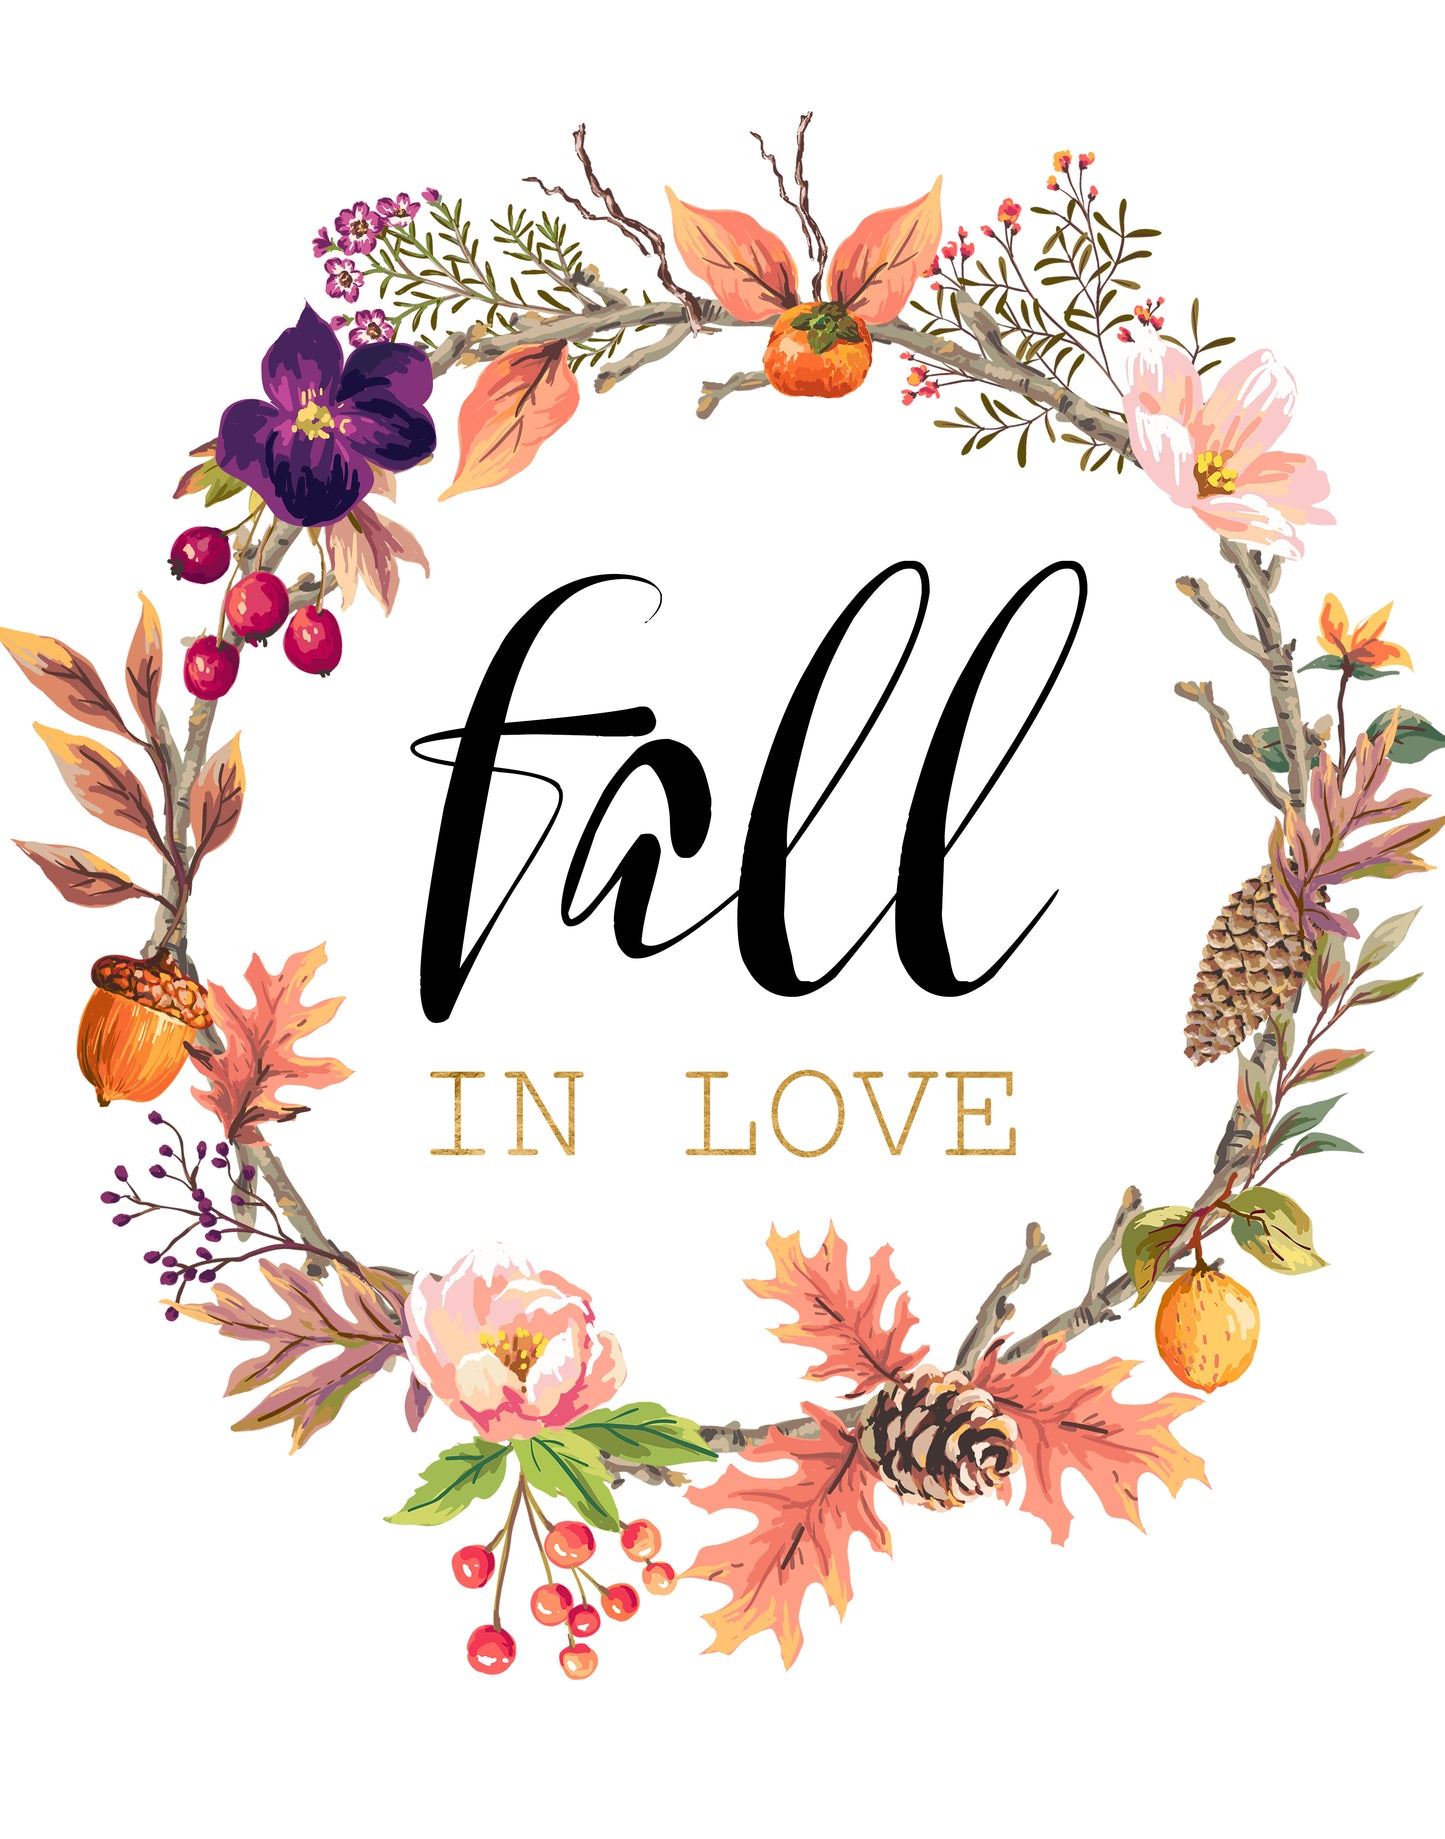 Fall in love with FallDesign Transfer